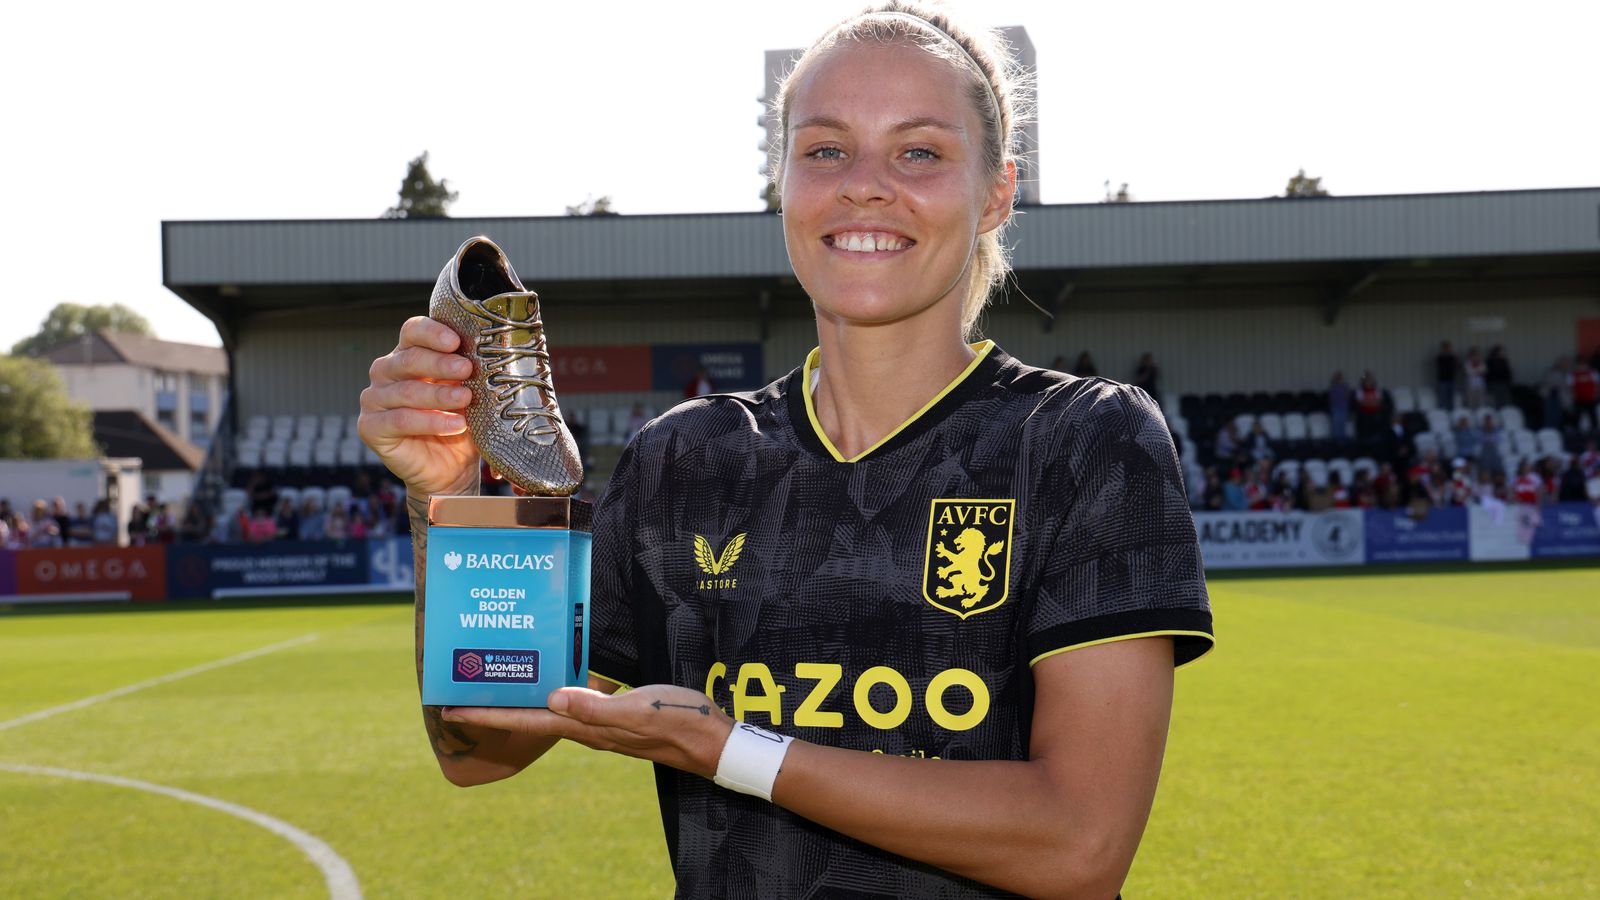 WSL round-up: Rachel Daly equals goal record in Aston Villa win at Arsenal | Football News